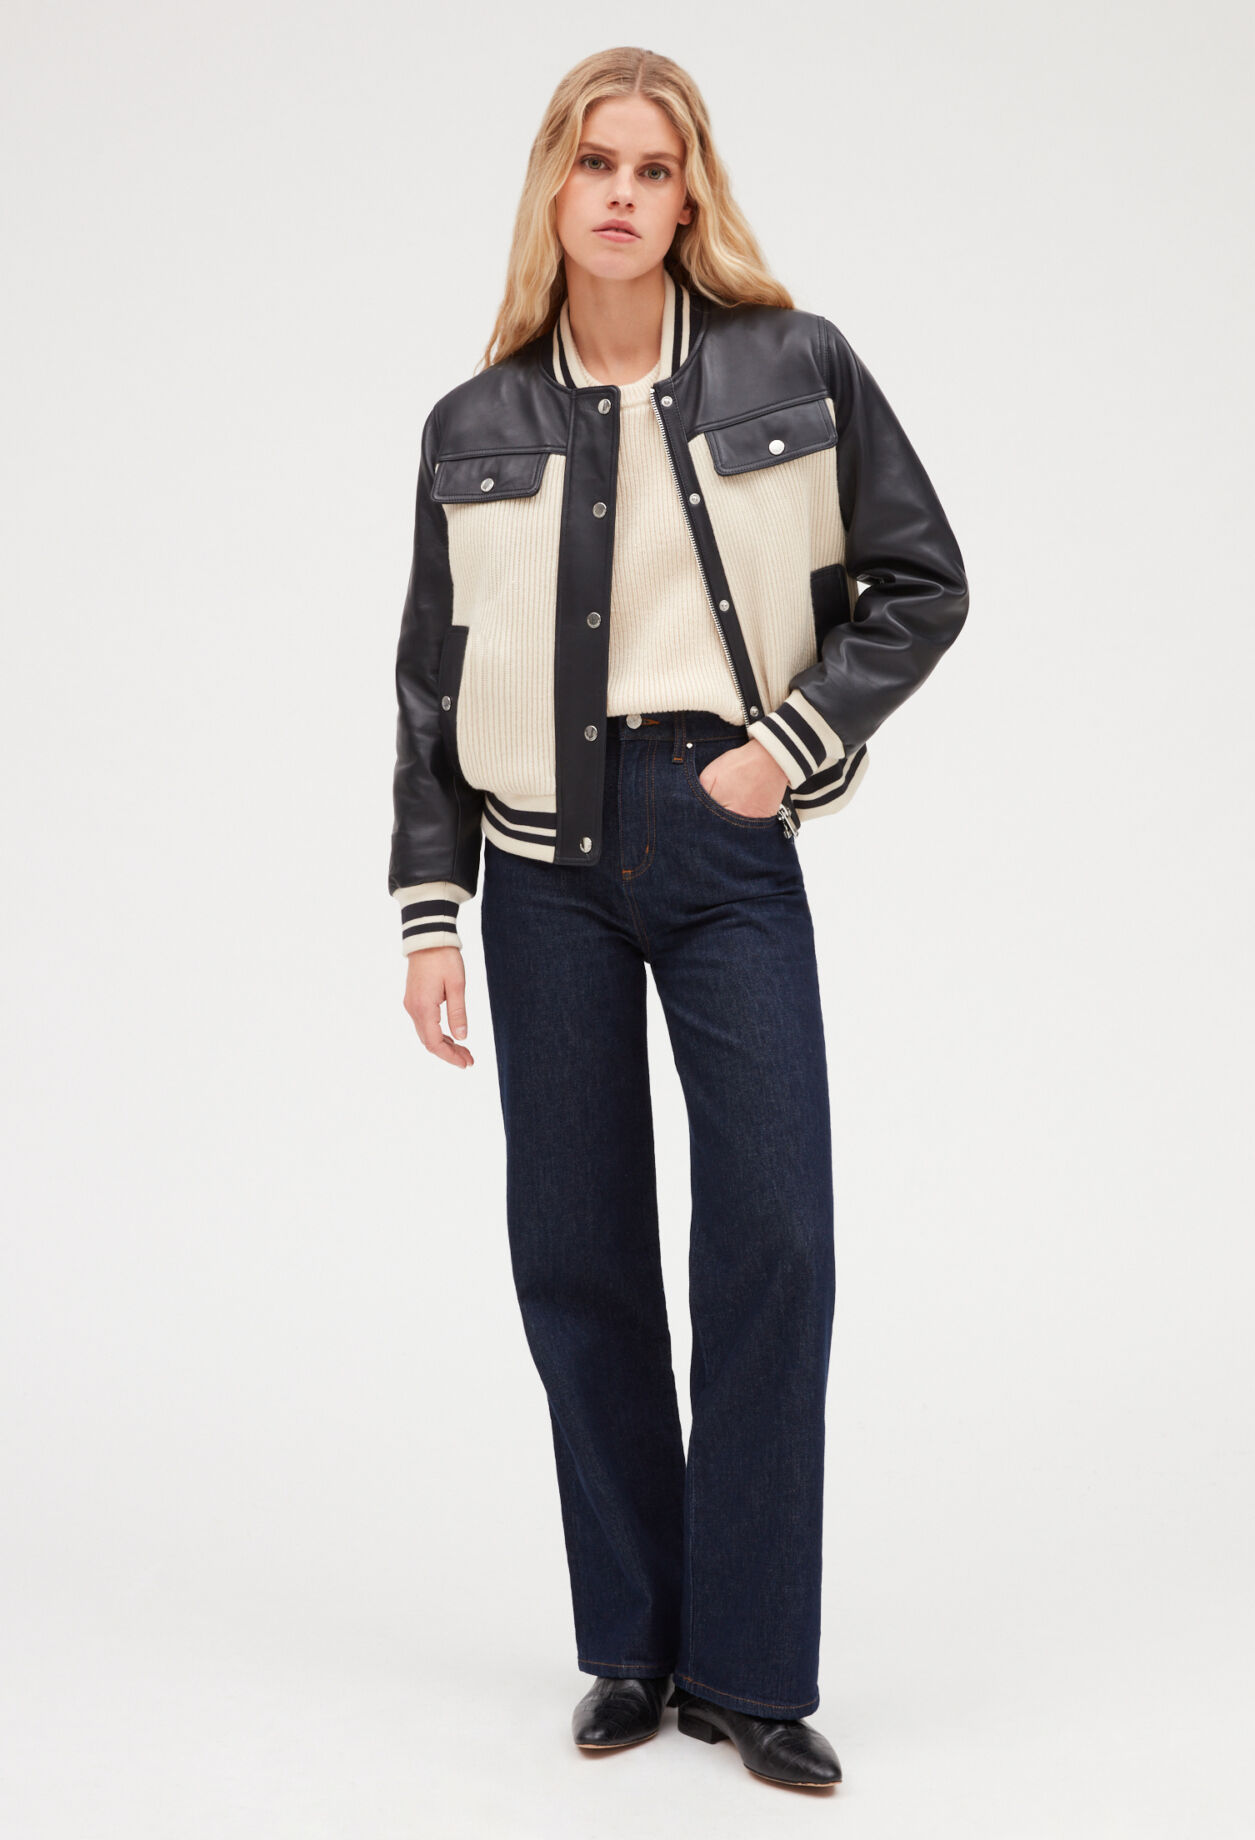 Women's Jackets Sale | Leather, Denim & More | Whistles UK |